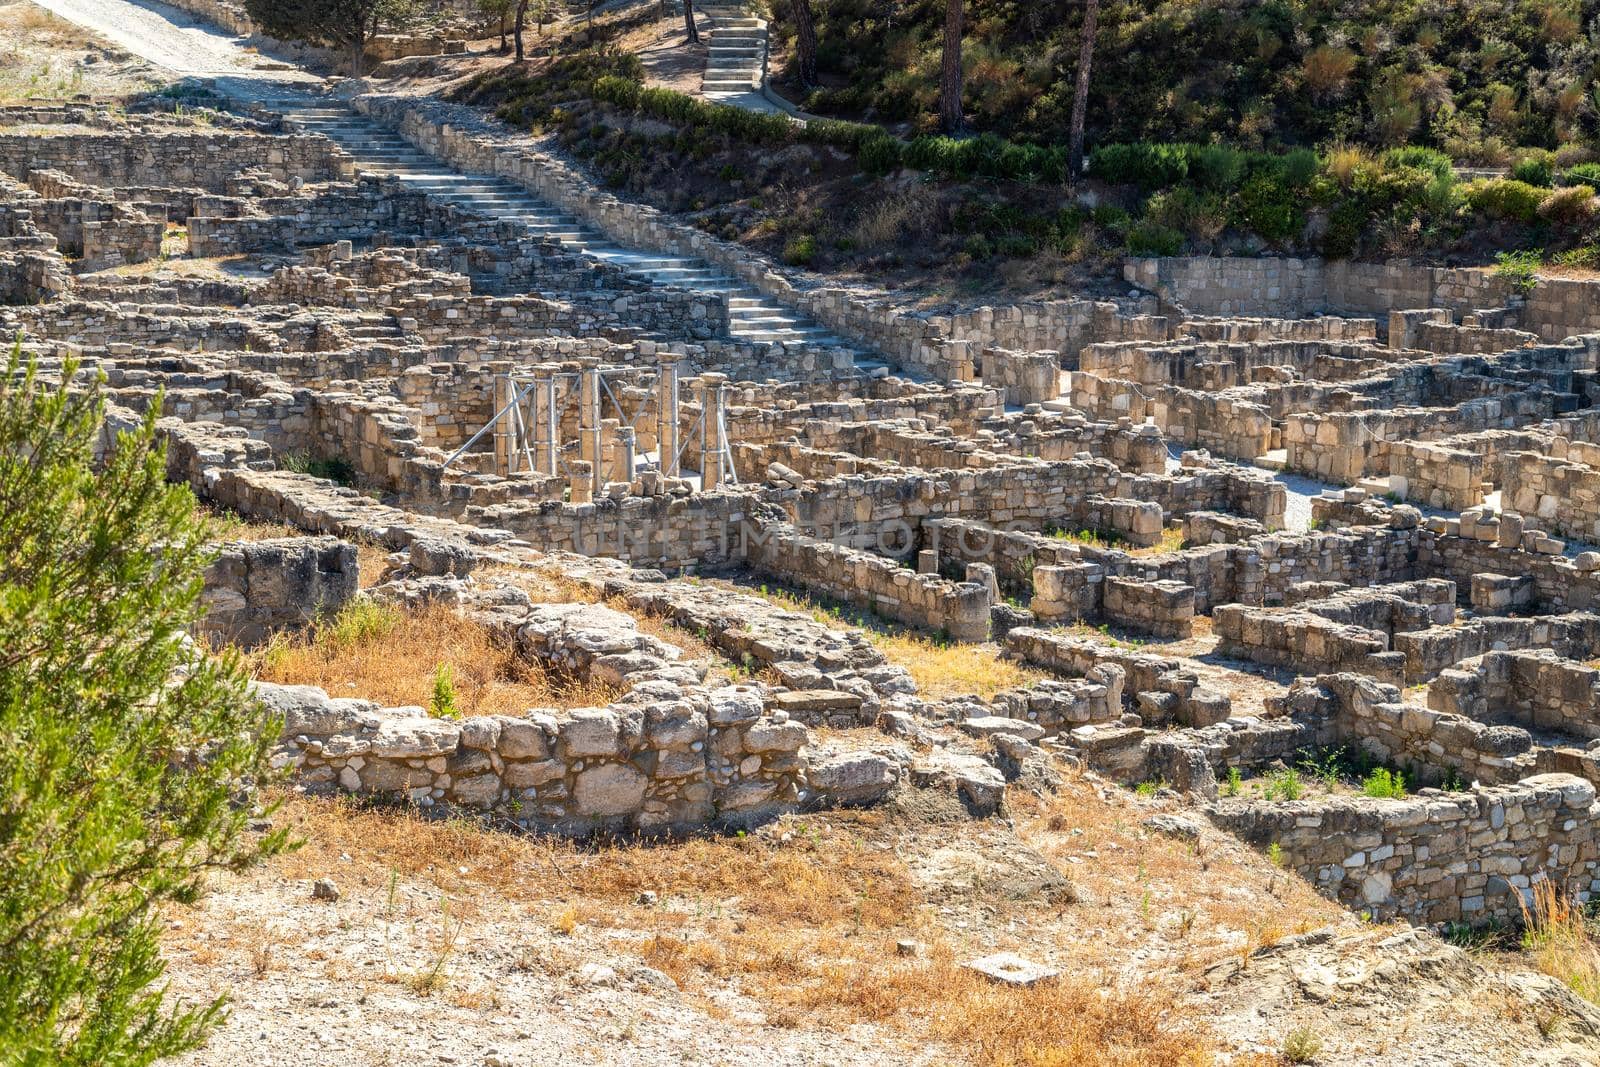 Excavation site of the ancient city of Kamiros at the westside of Rhodes island, Greece by reinerc